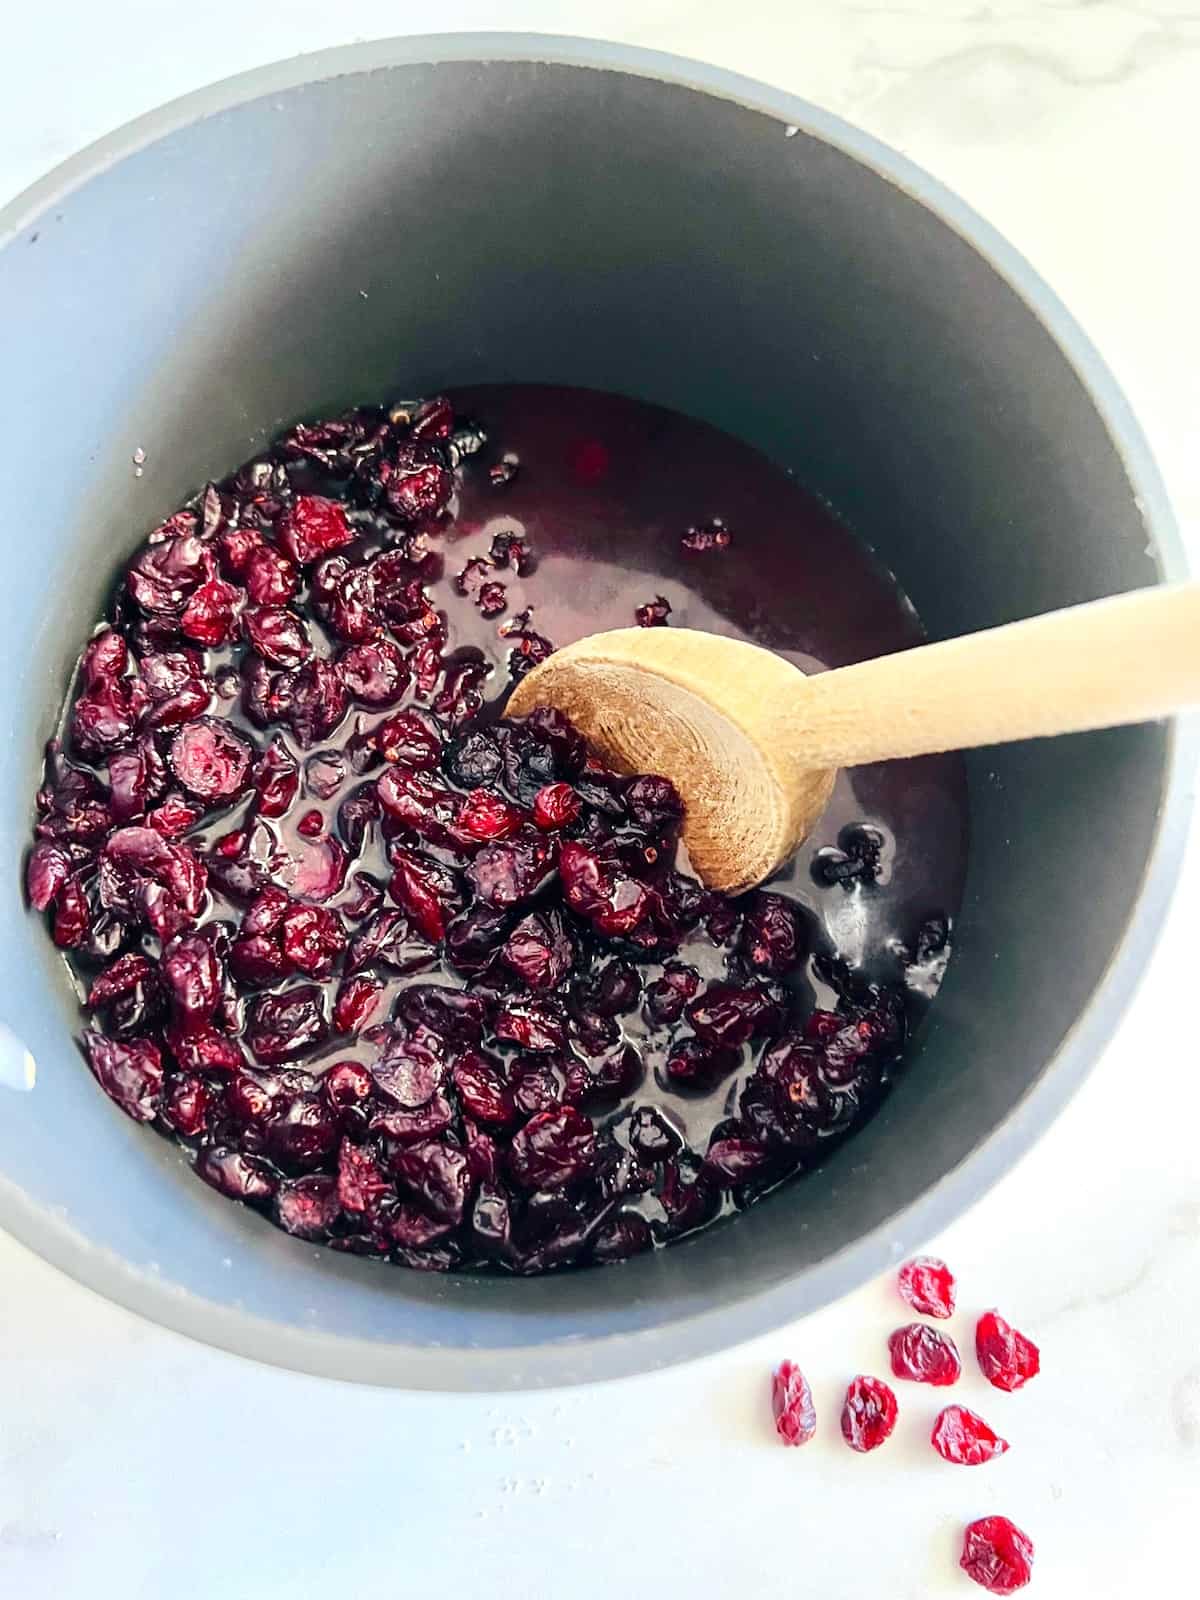 All the ingredients to make cranberry sauce from dried cranberries in a pot ready to cook.